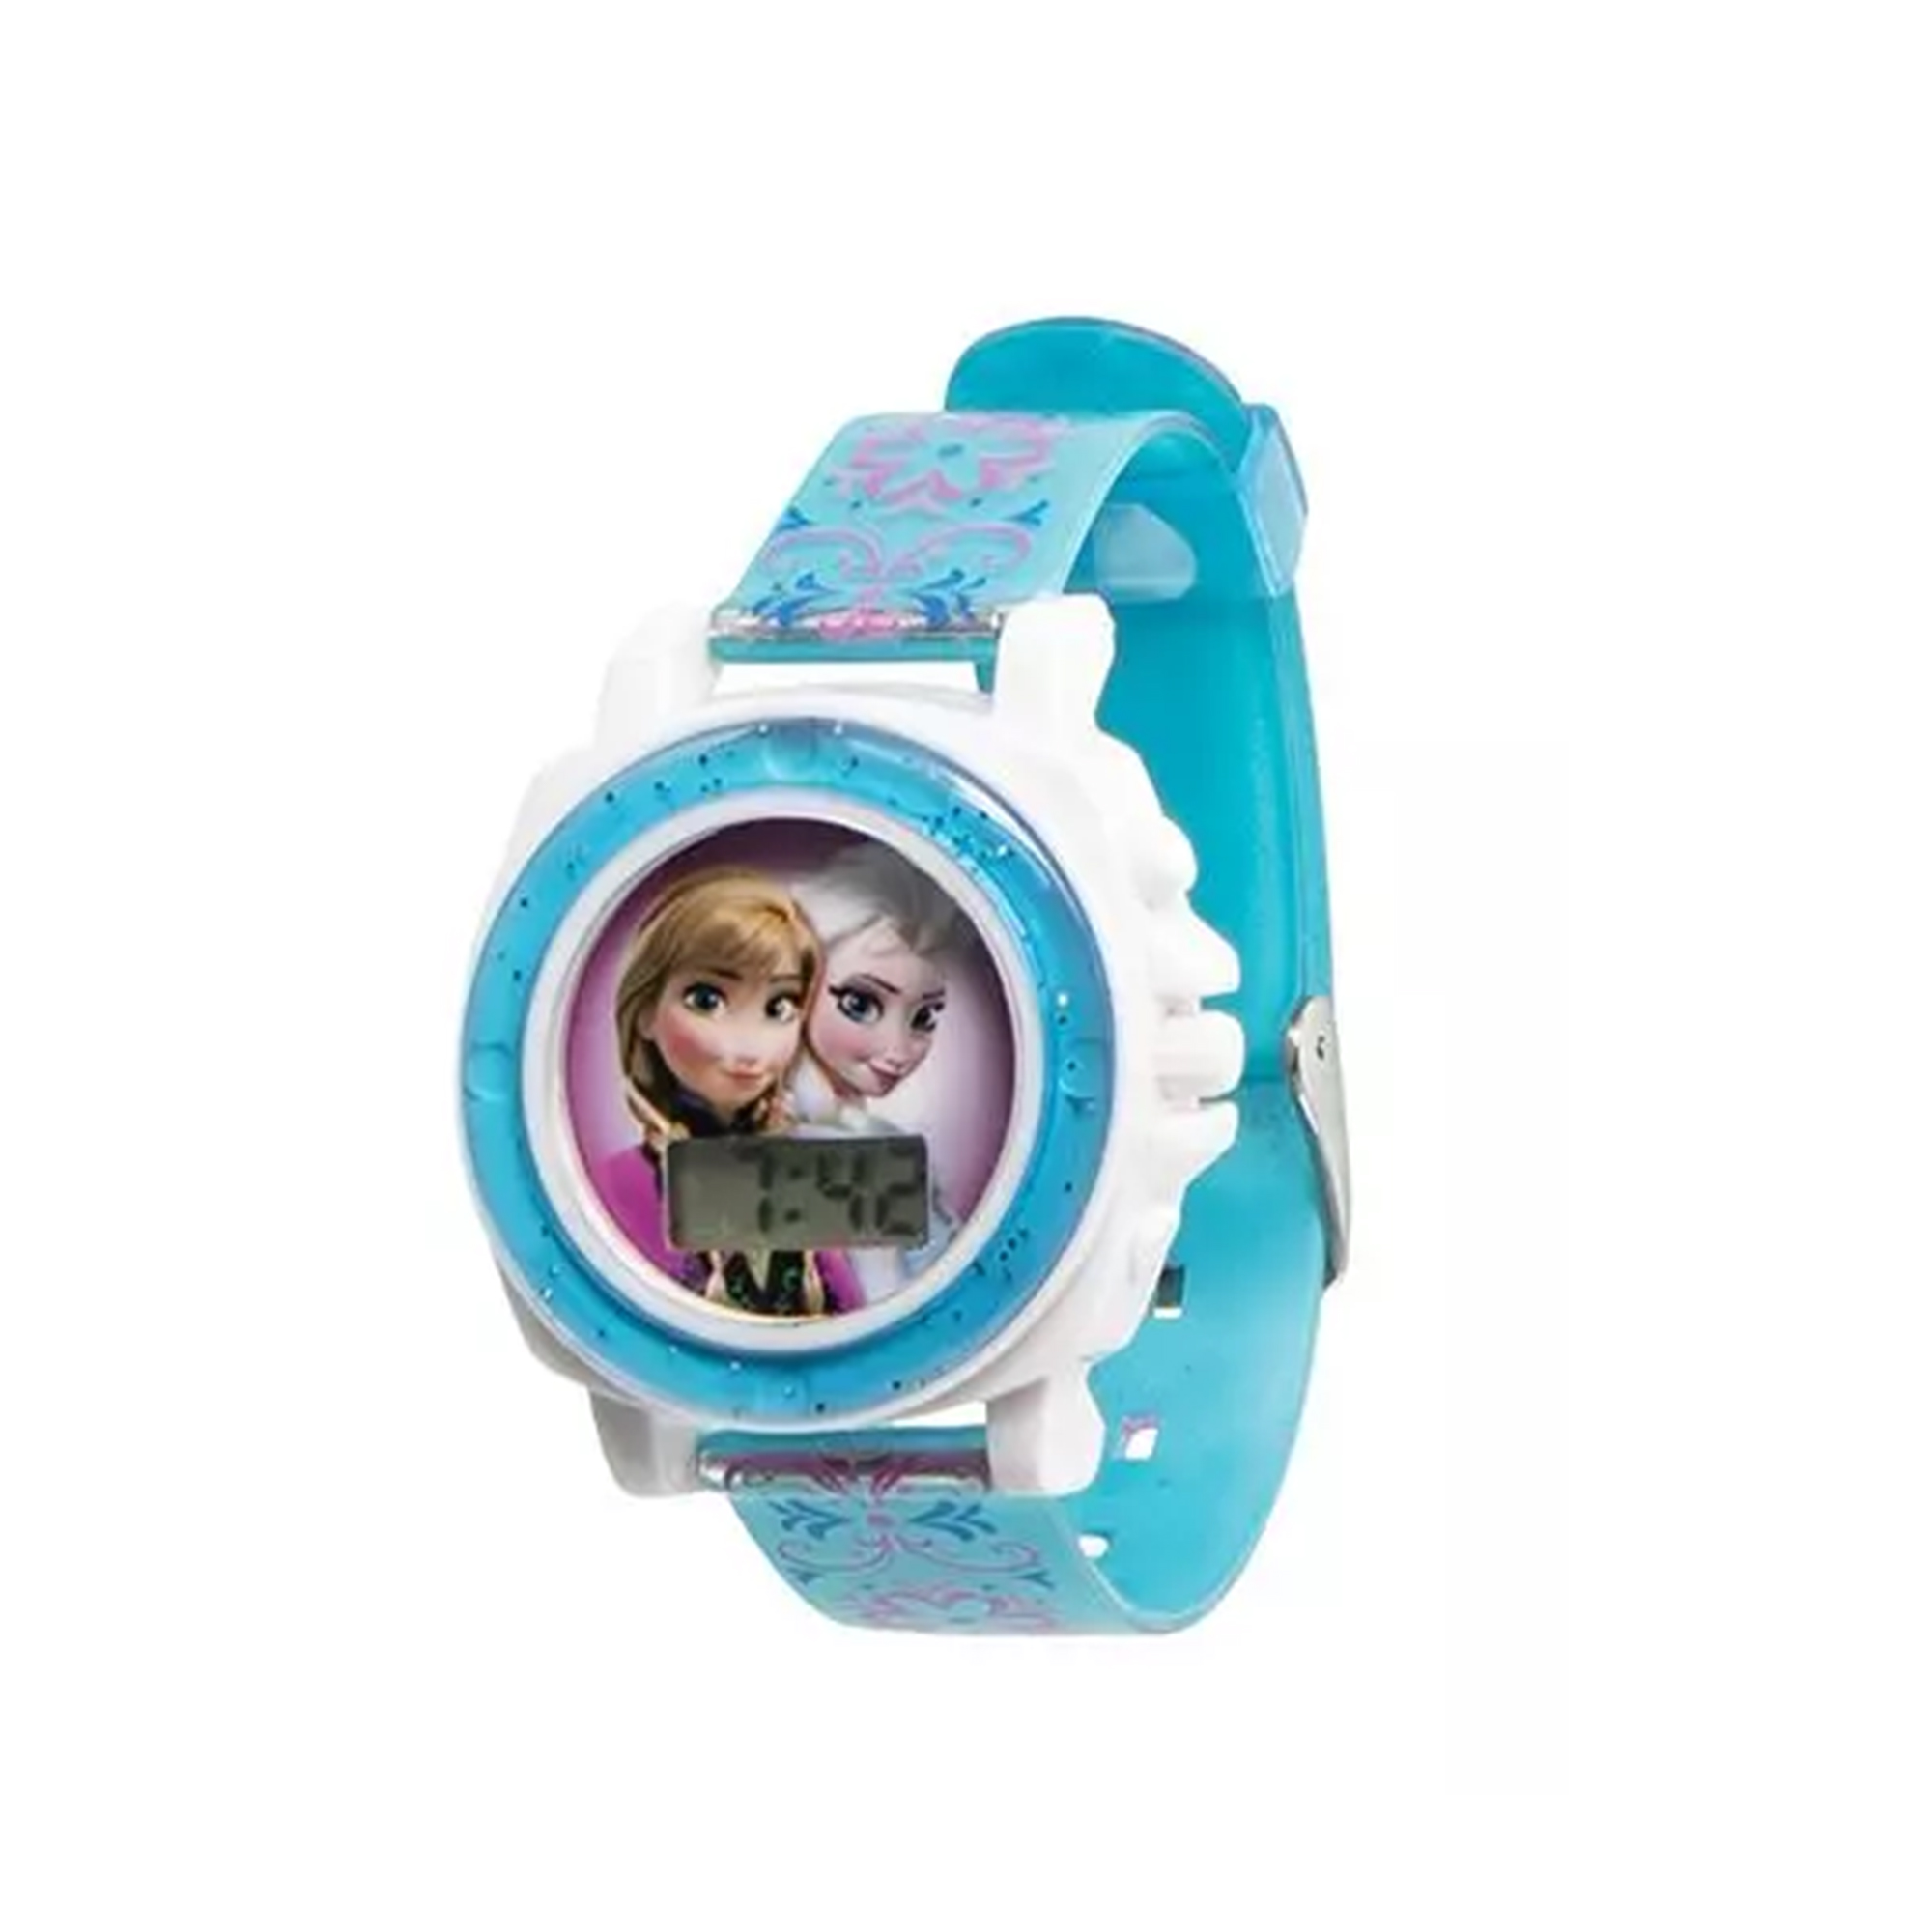 Disney Frozen II LCD Watch in Colorful Gift Case, White/Blue, Silicone Band, Plays Let It Go, Ages 3-6